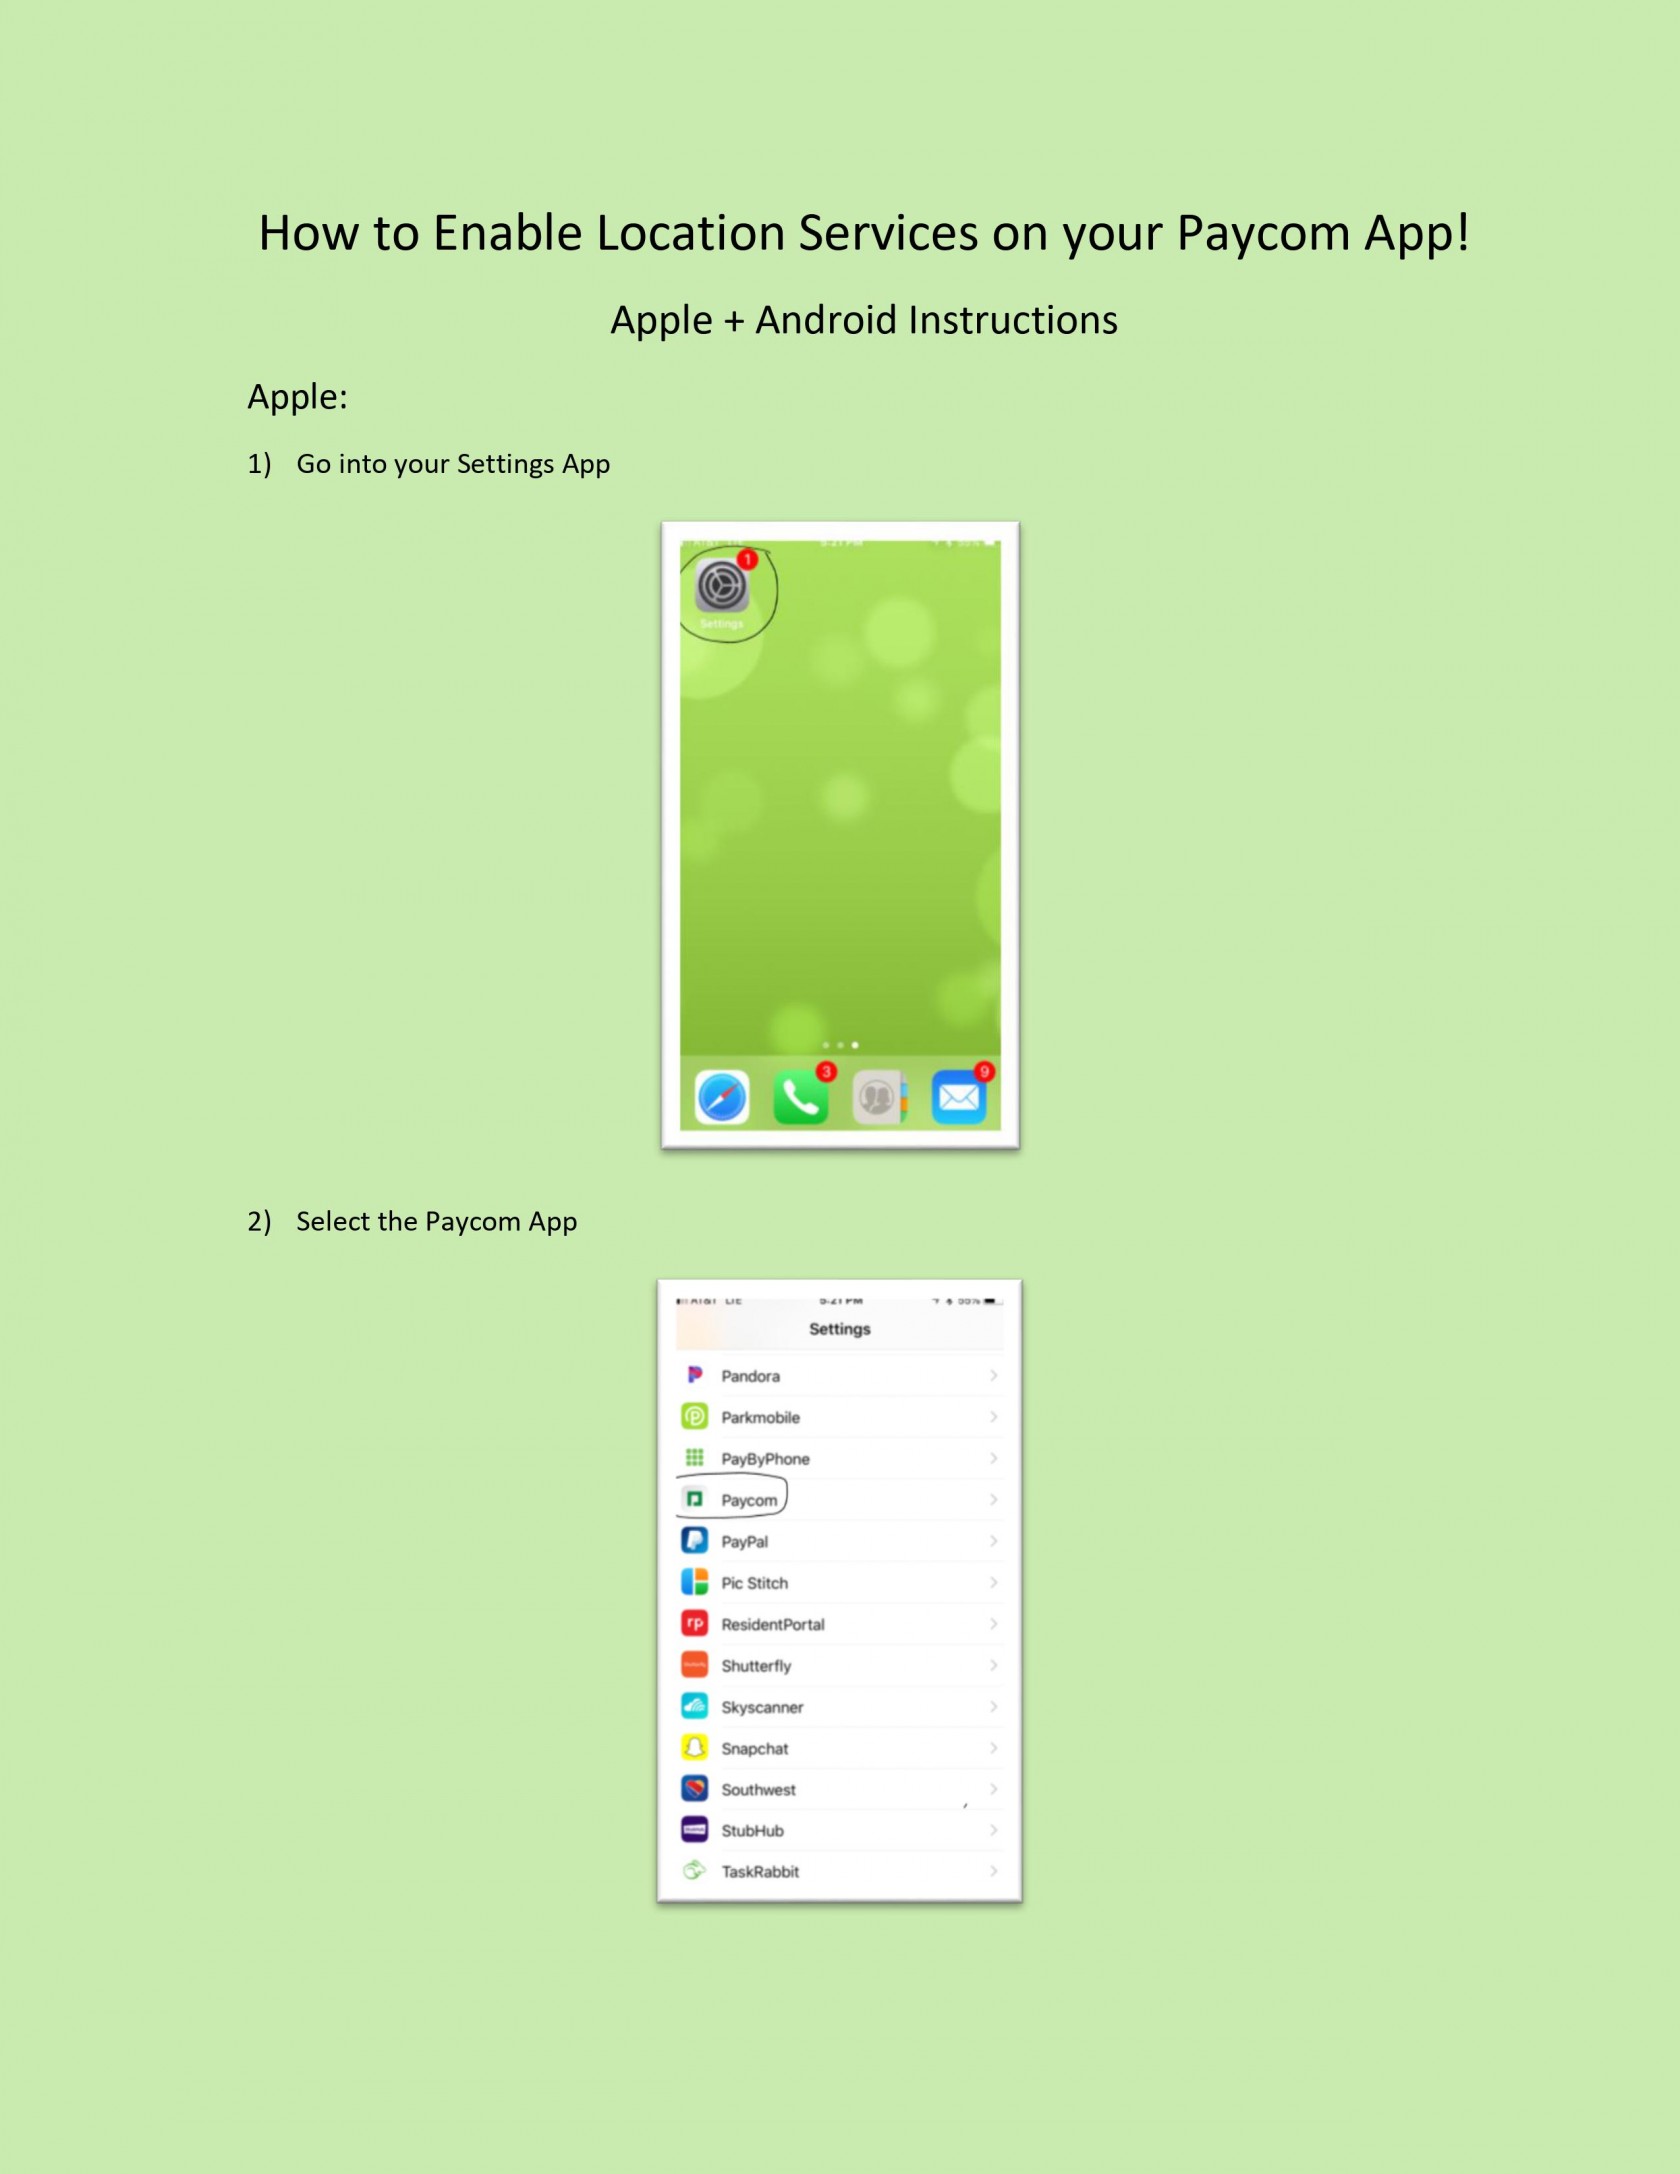 Ho-to-Enable-Location-Services-on-Paycom-App---Apple---Page-1.jpg